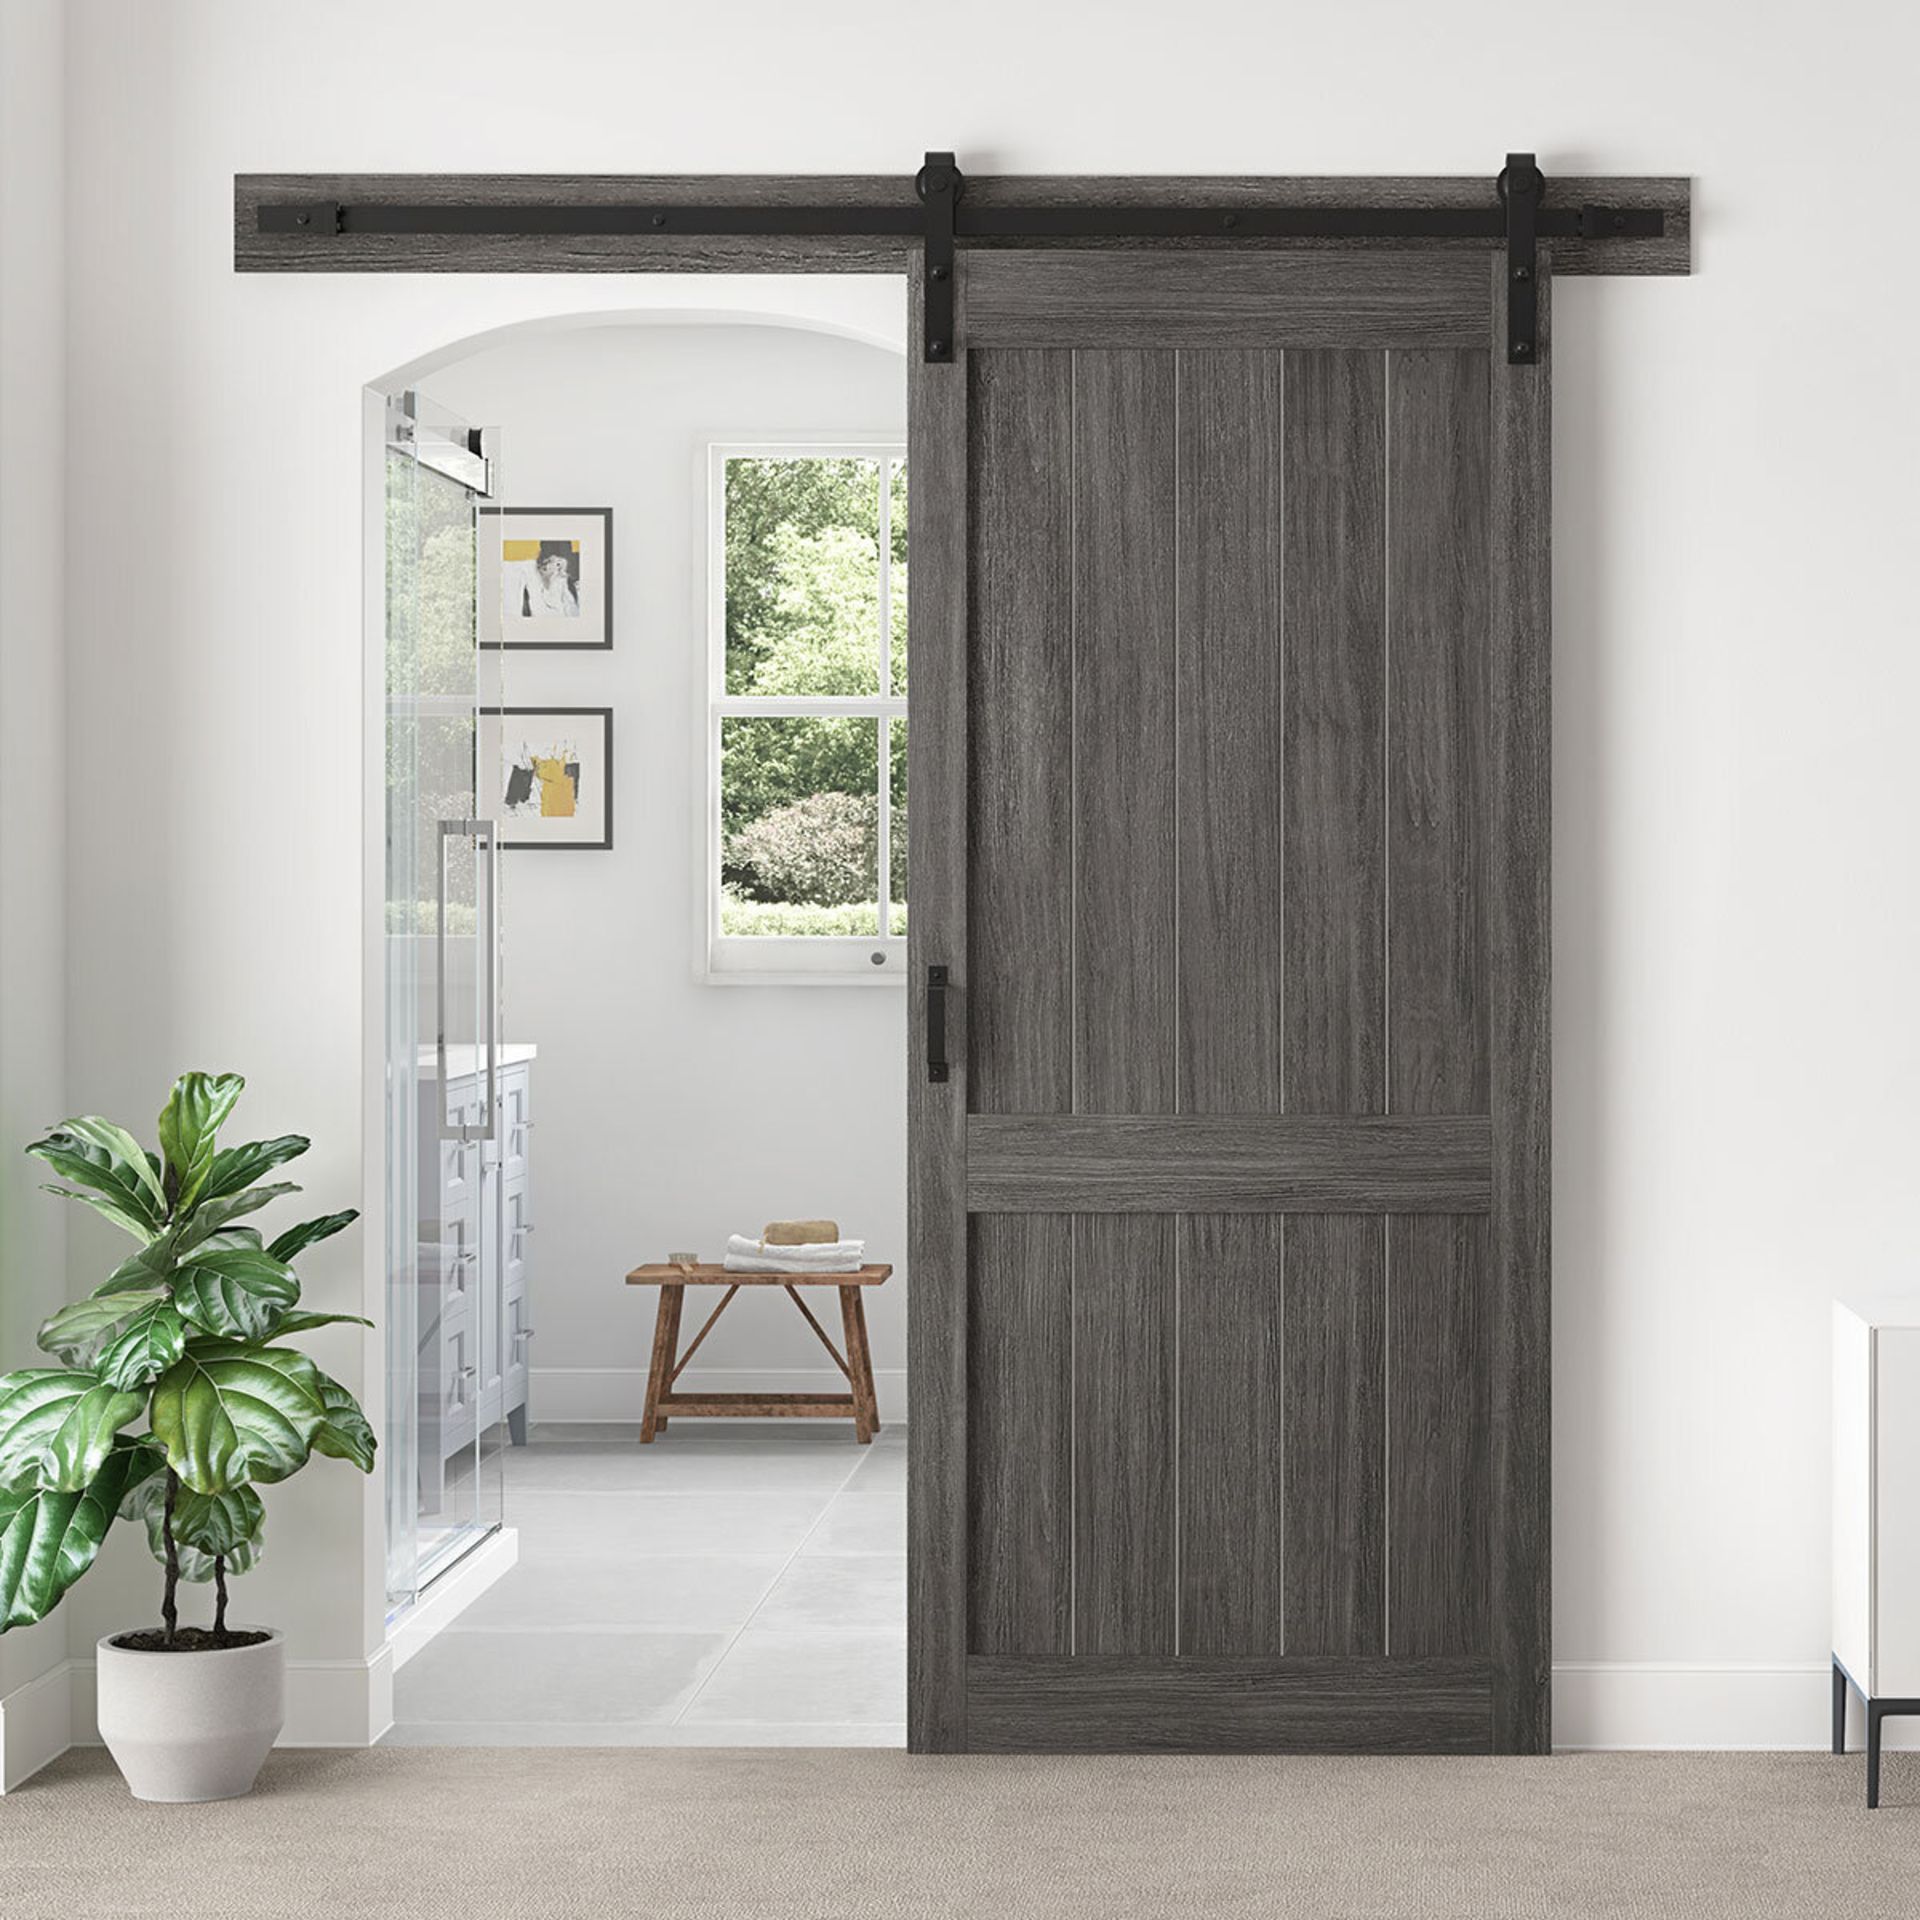 1 BOXED OVE DECORS HOMESTEAD SLIDING INTERIOR BARN DOOR IN CARBON GREY WOOD RRP Â£399 (PICTURES